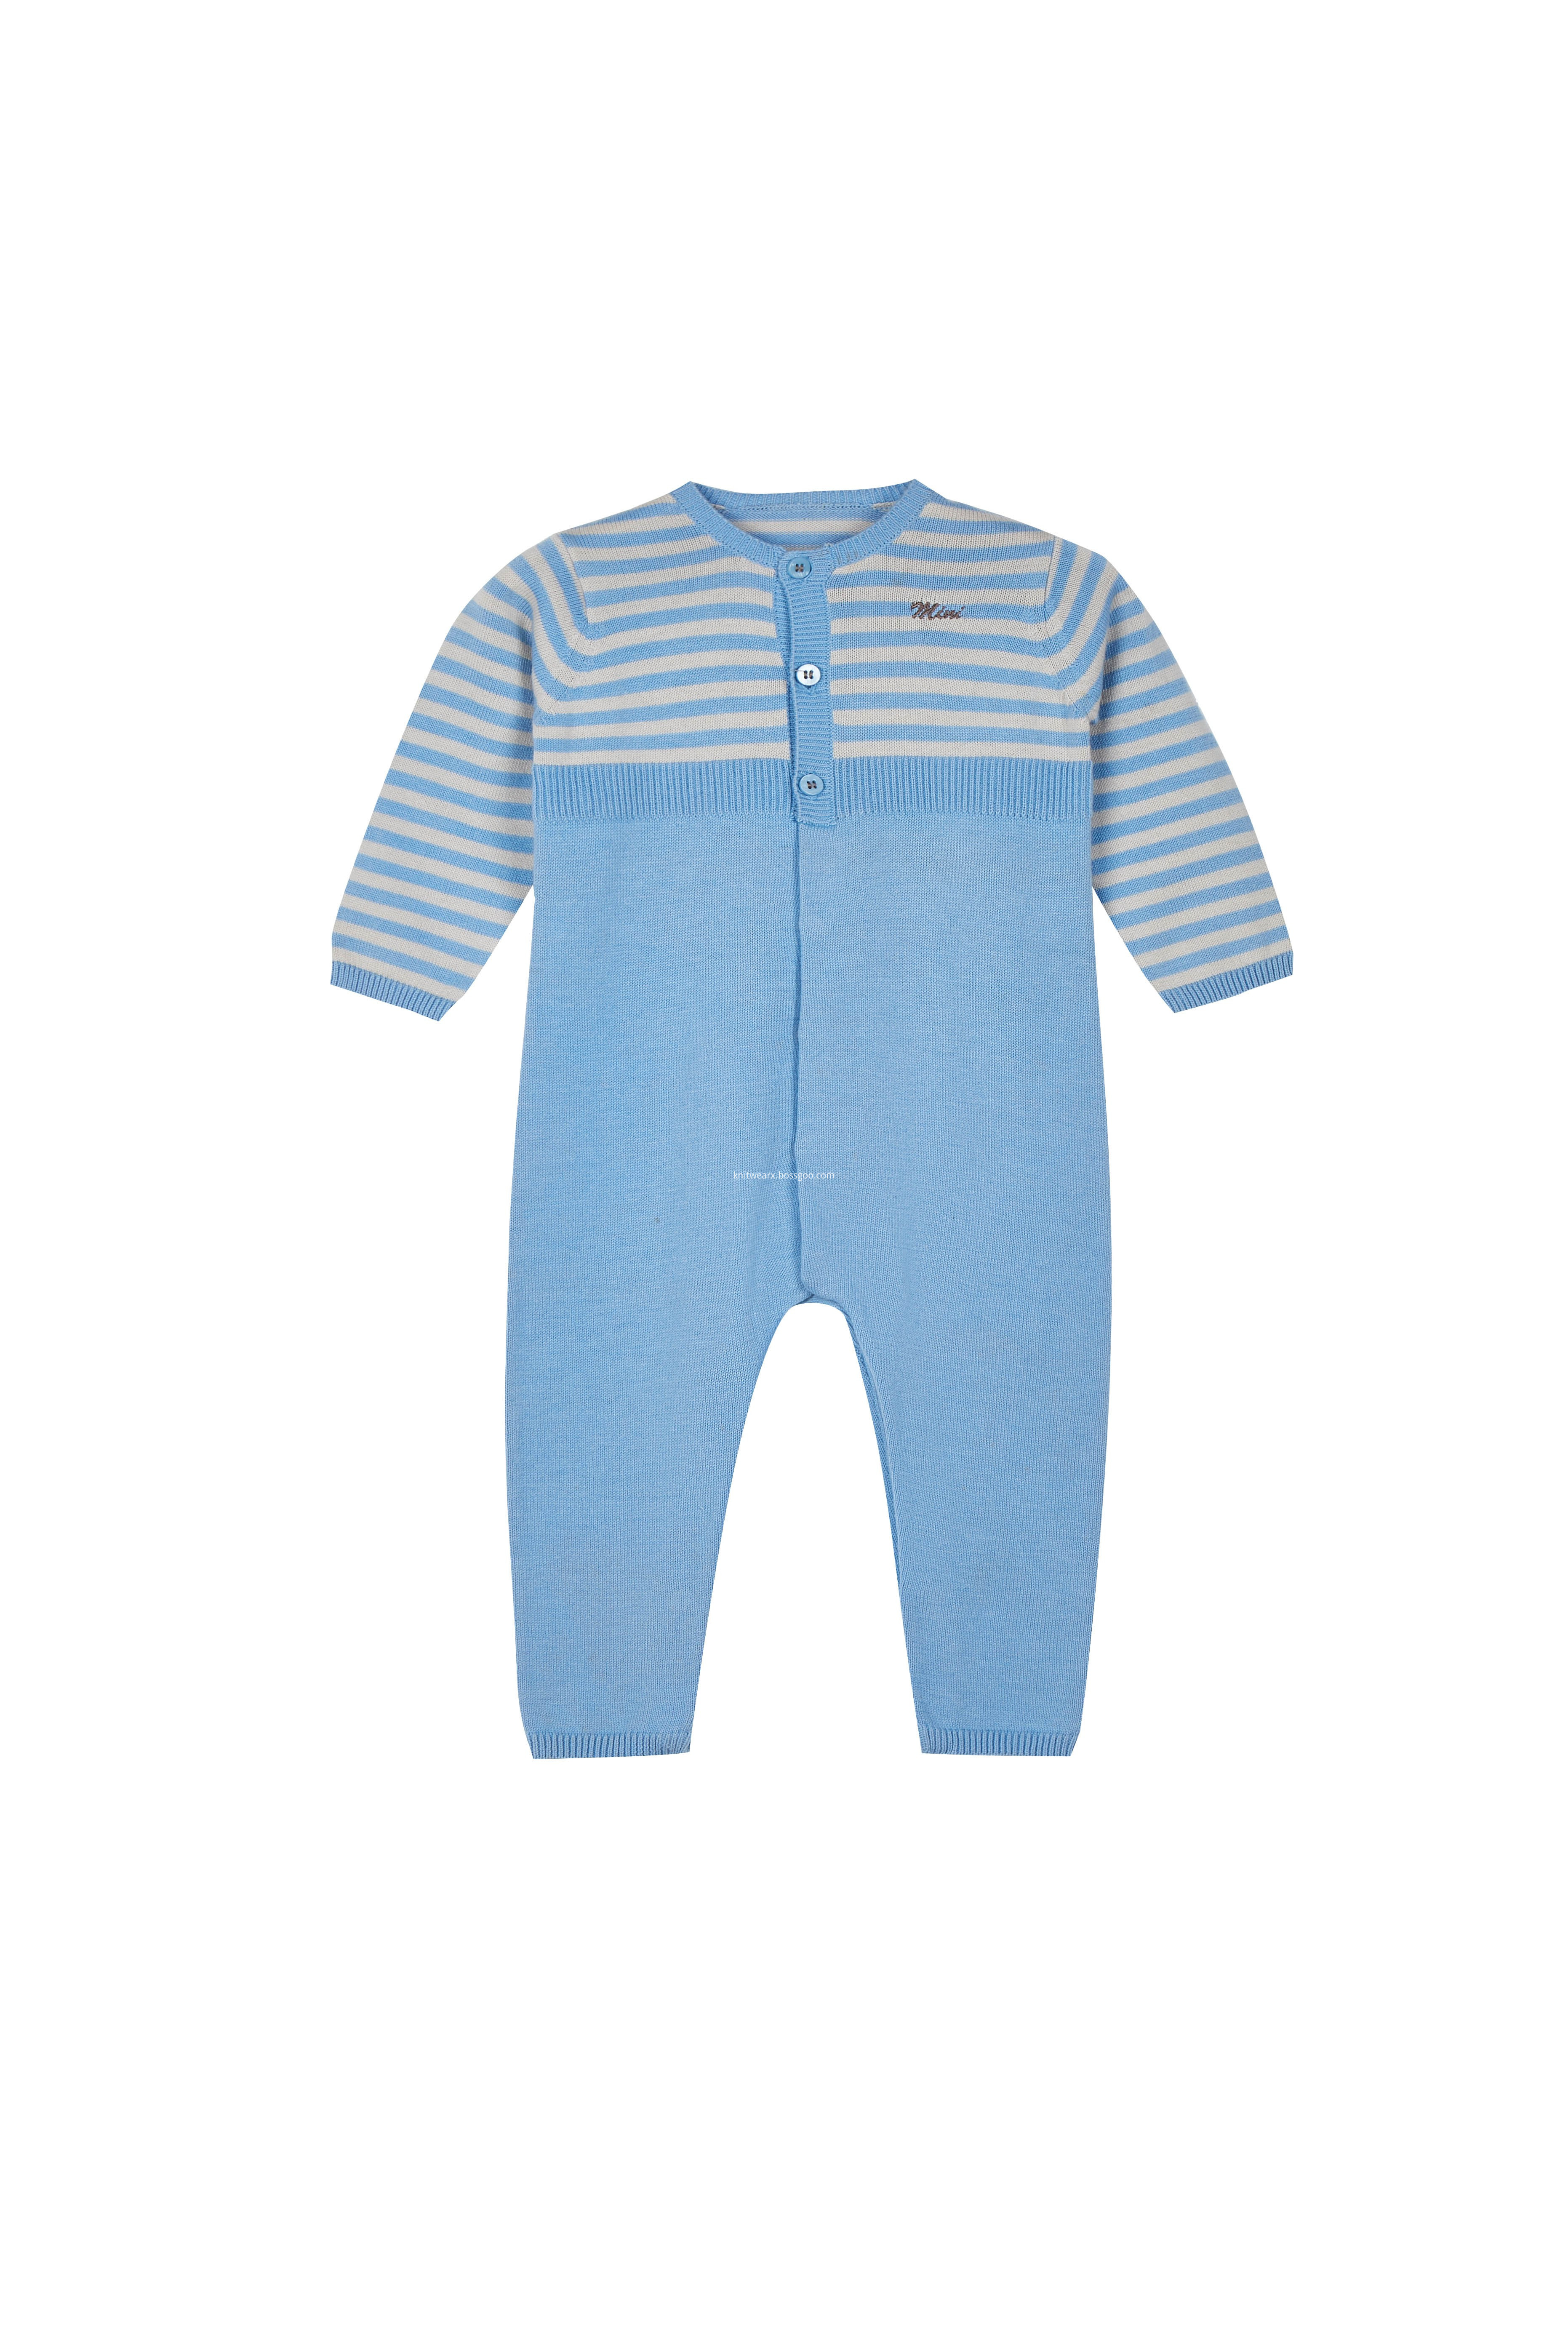 Boy's Girl's Knitted Stripe Buttoned Baby Pajamas Romper